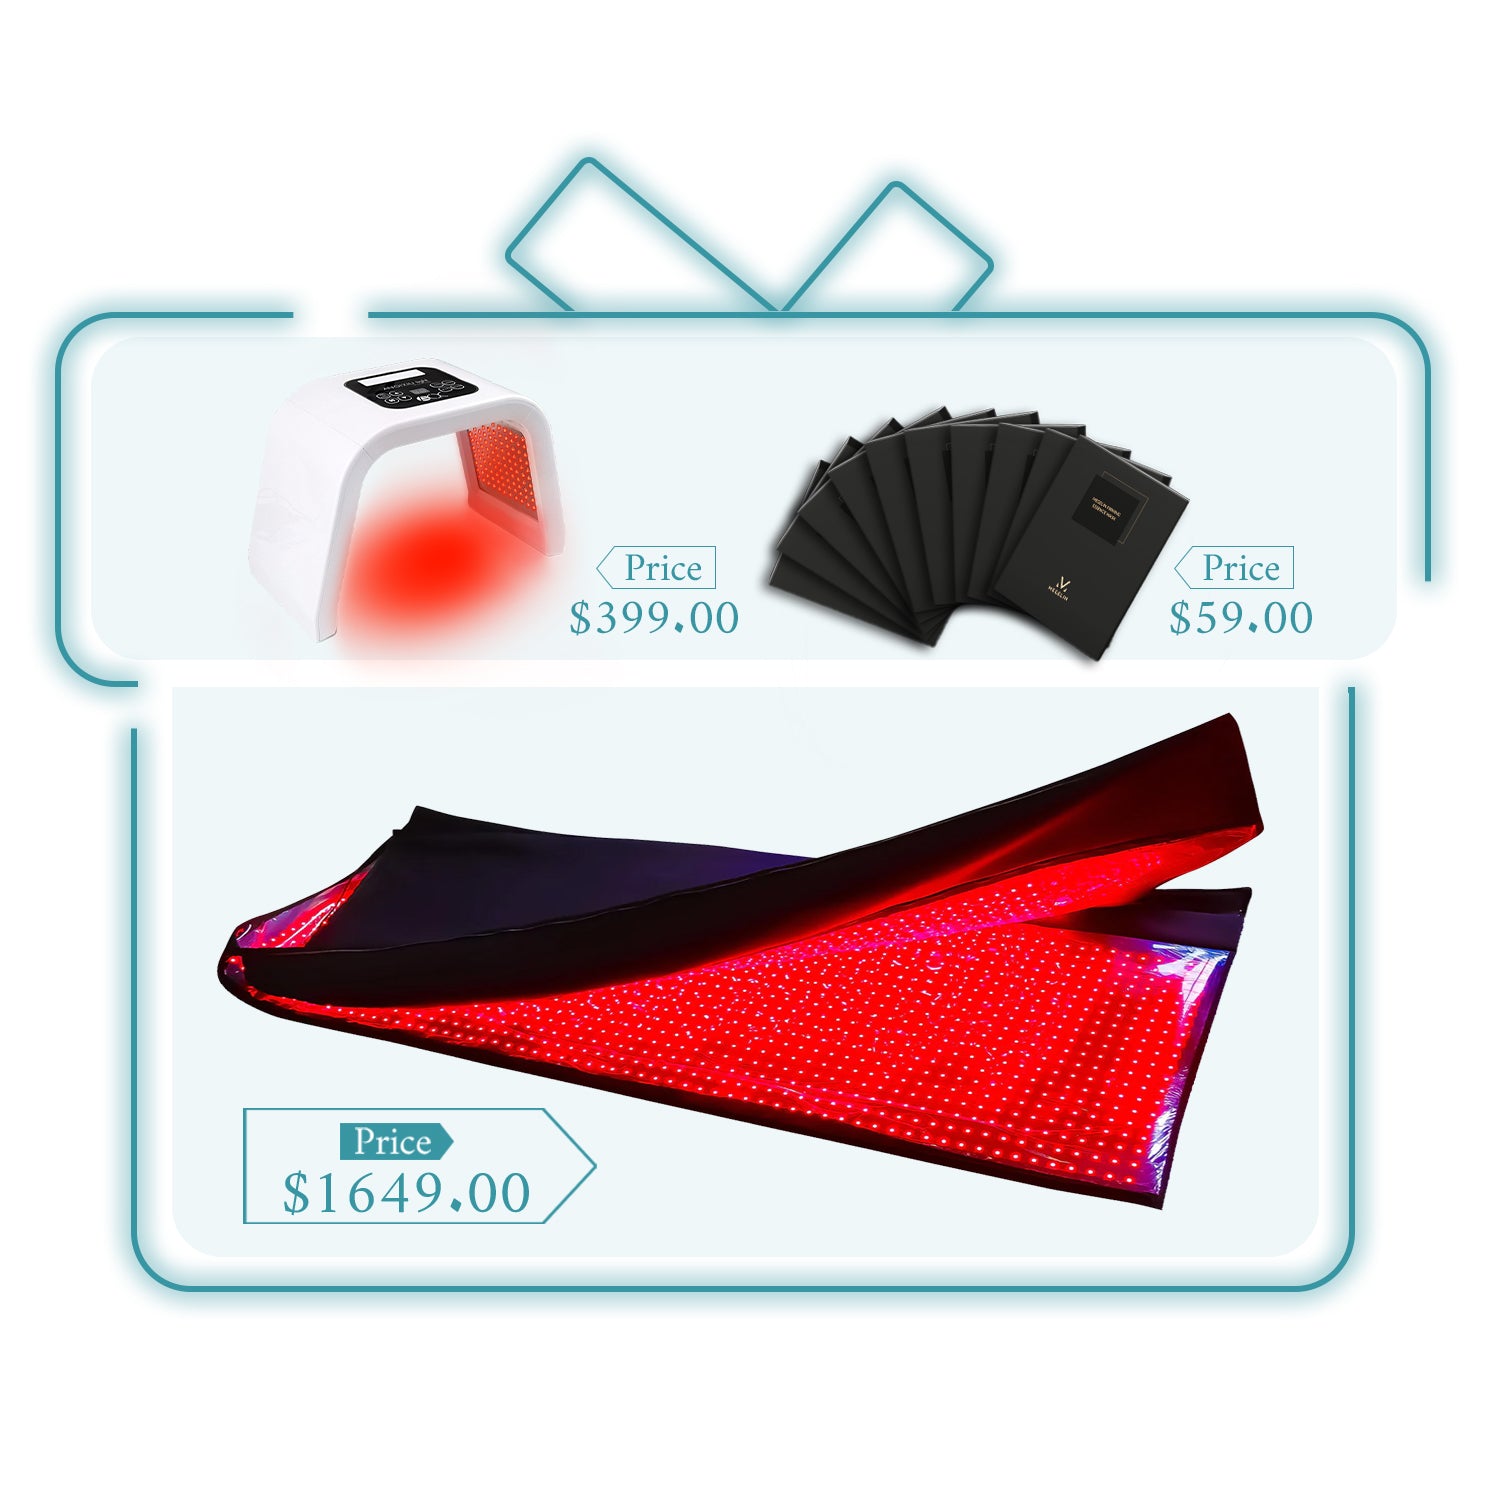 Megelin Red Infrared Light Therapy Mat for Whole Body